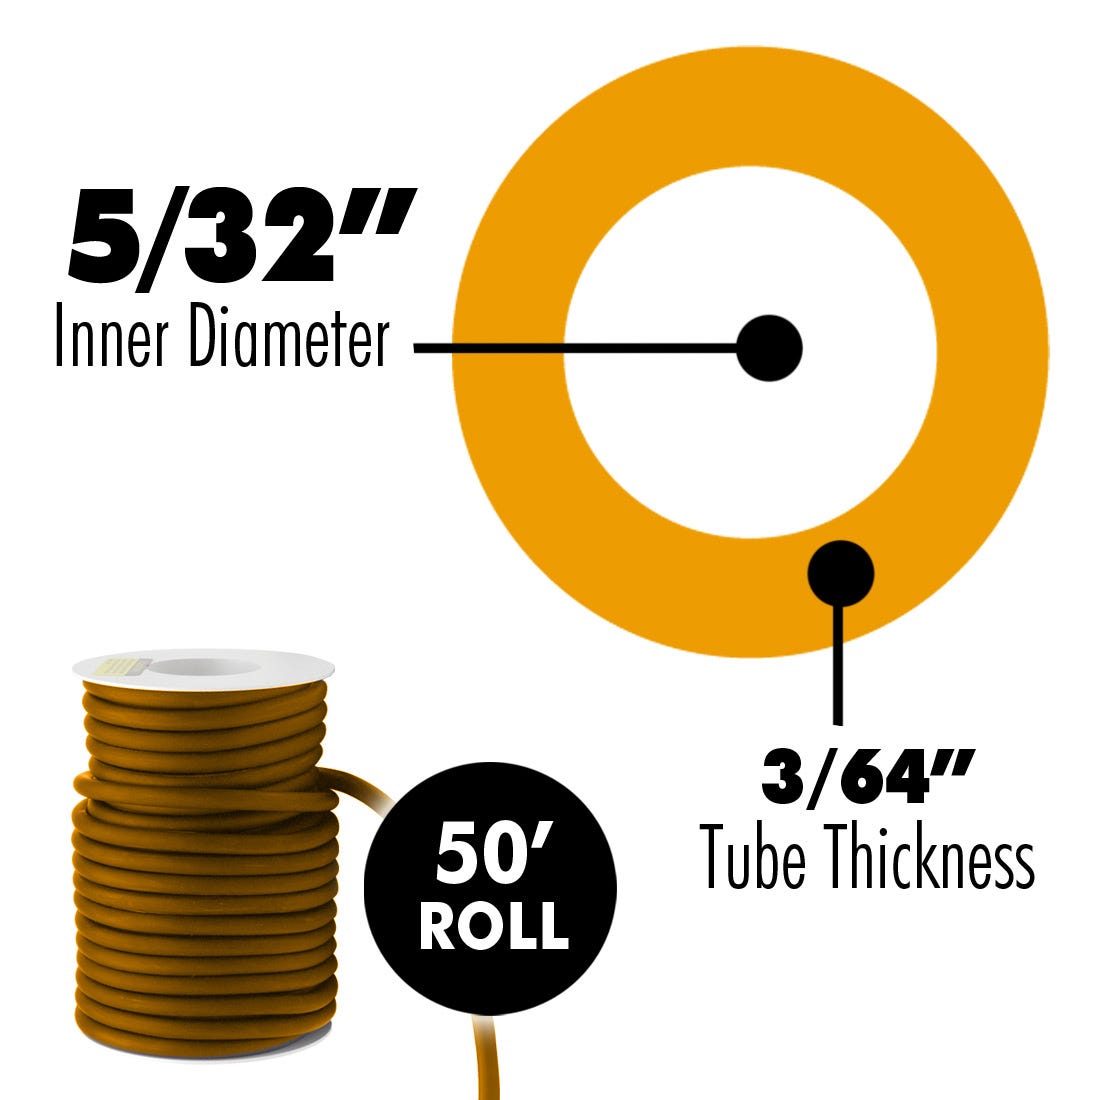 ACE Latex Rubber Tubing Amber, 5/32" x 3/64"- 50' Roll